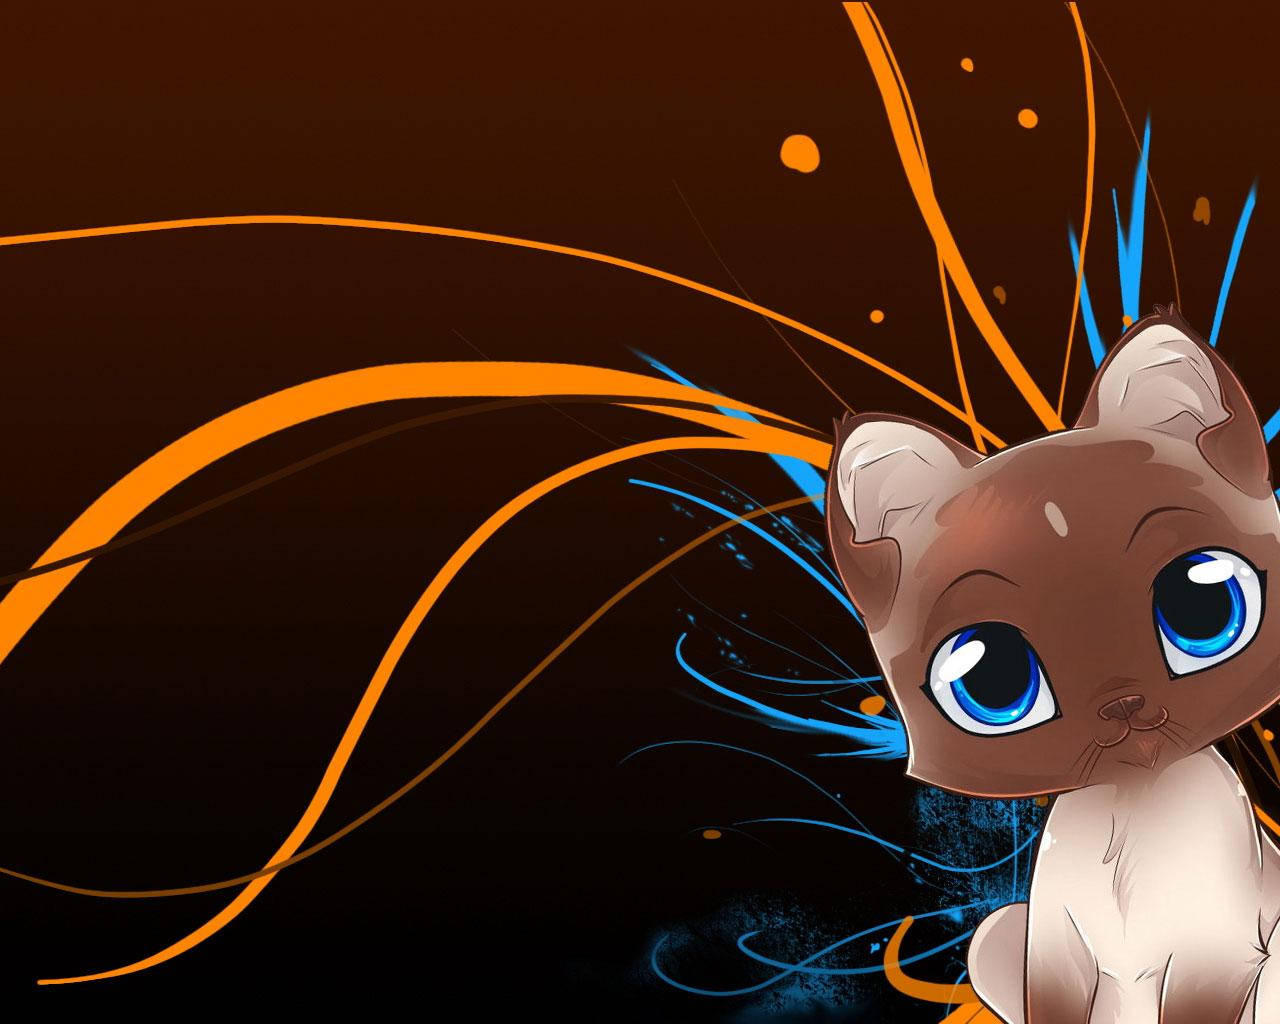 Kawaii Siamese Cat With Orange And Blue Lines Background